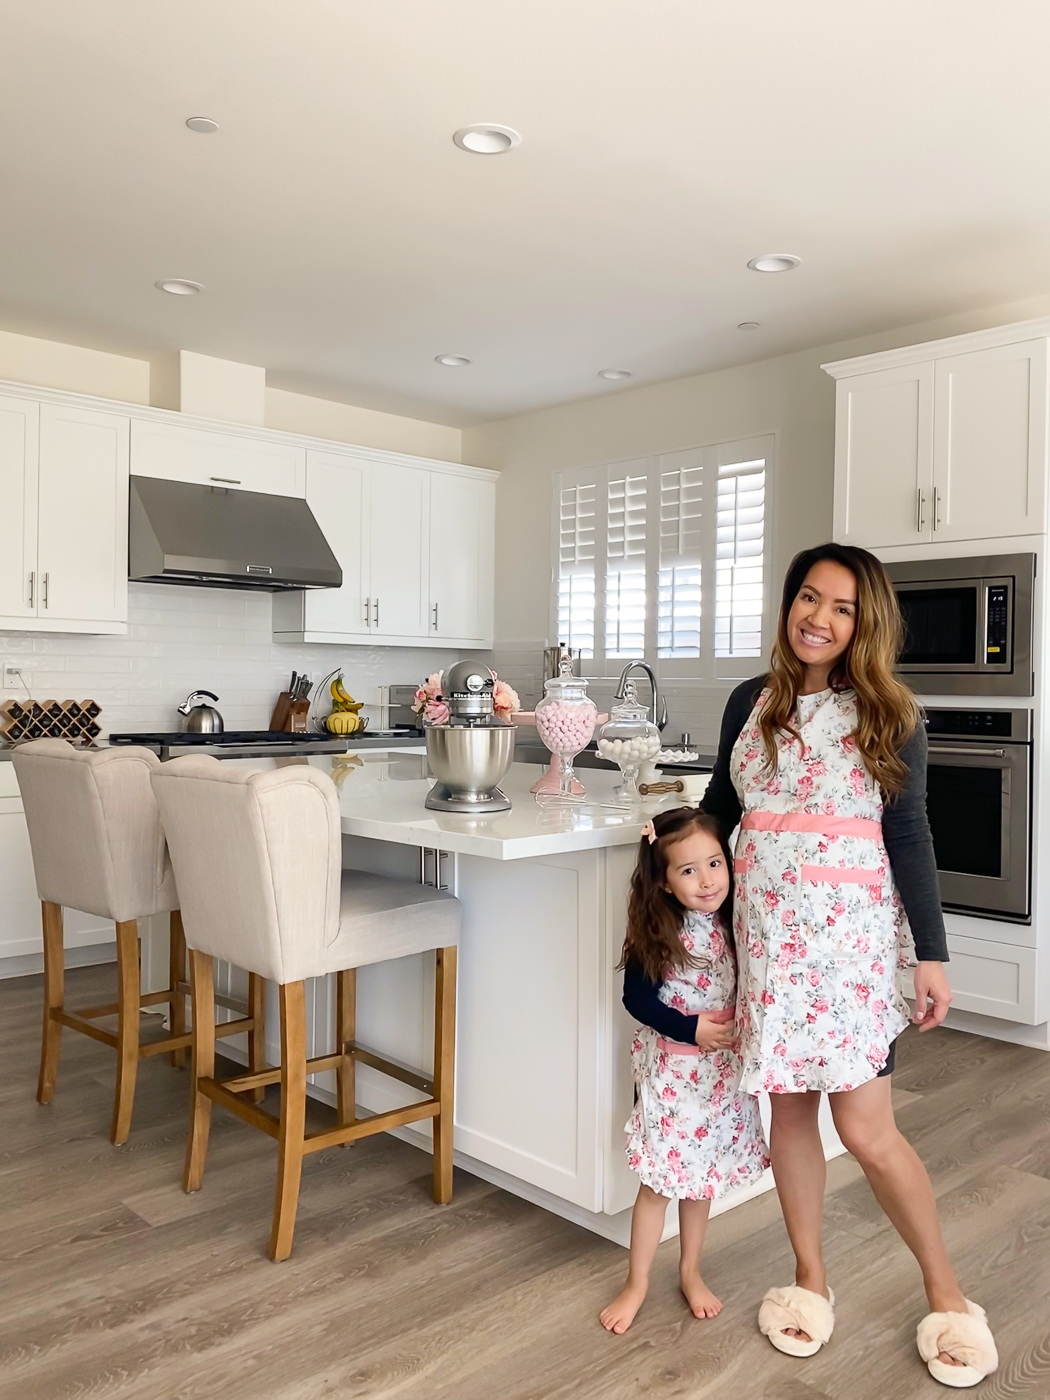 https://stylishpetite.com/wp-content/uploads/2020/04/mommy-and-me-matching-pink-floral-aprons-1-2.jpg